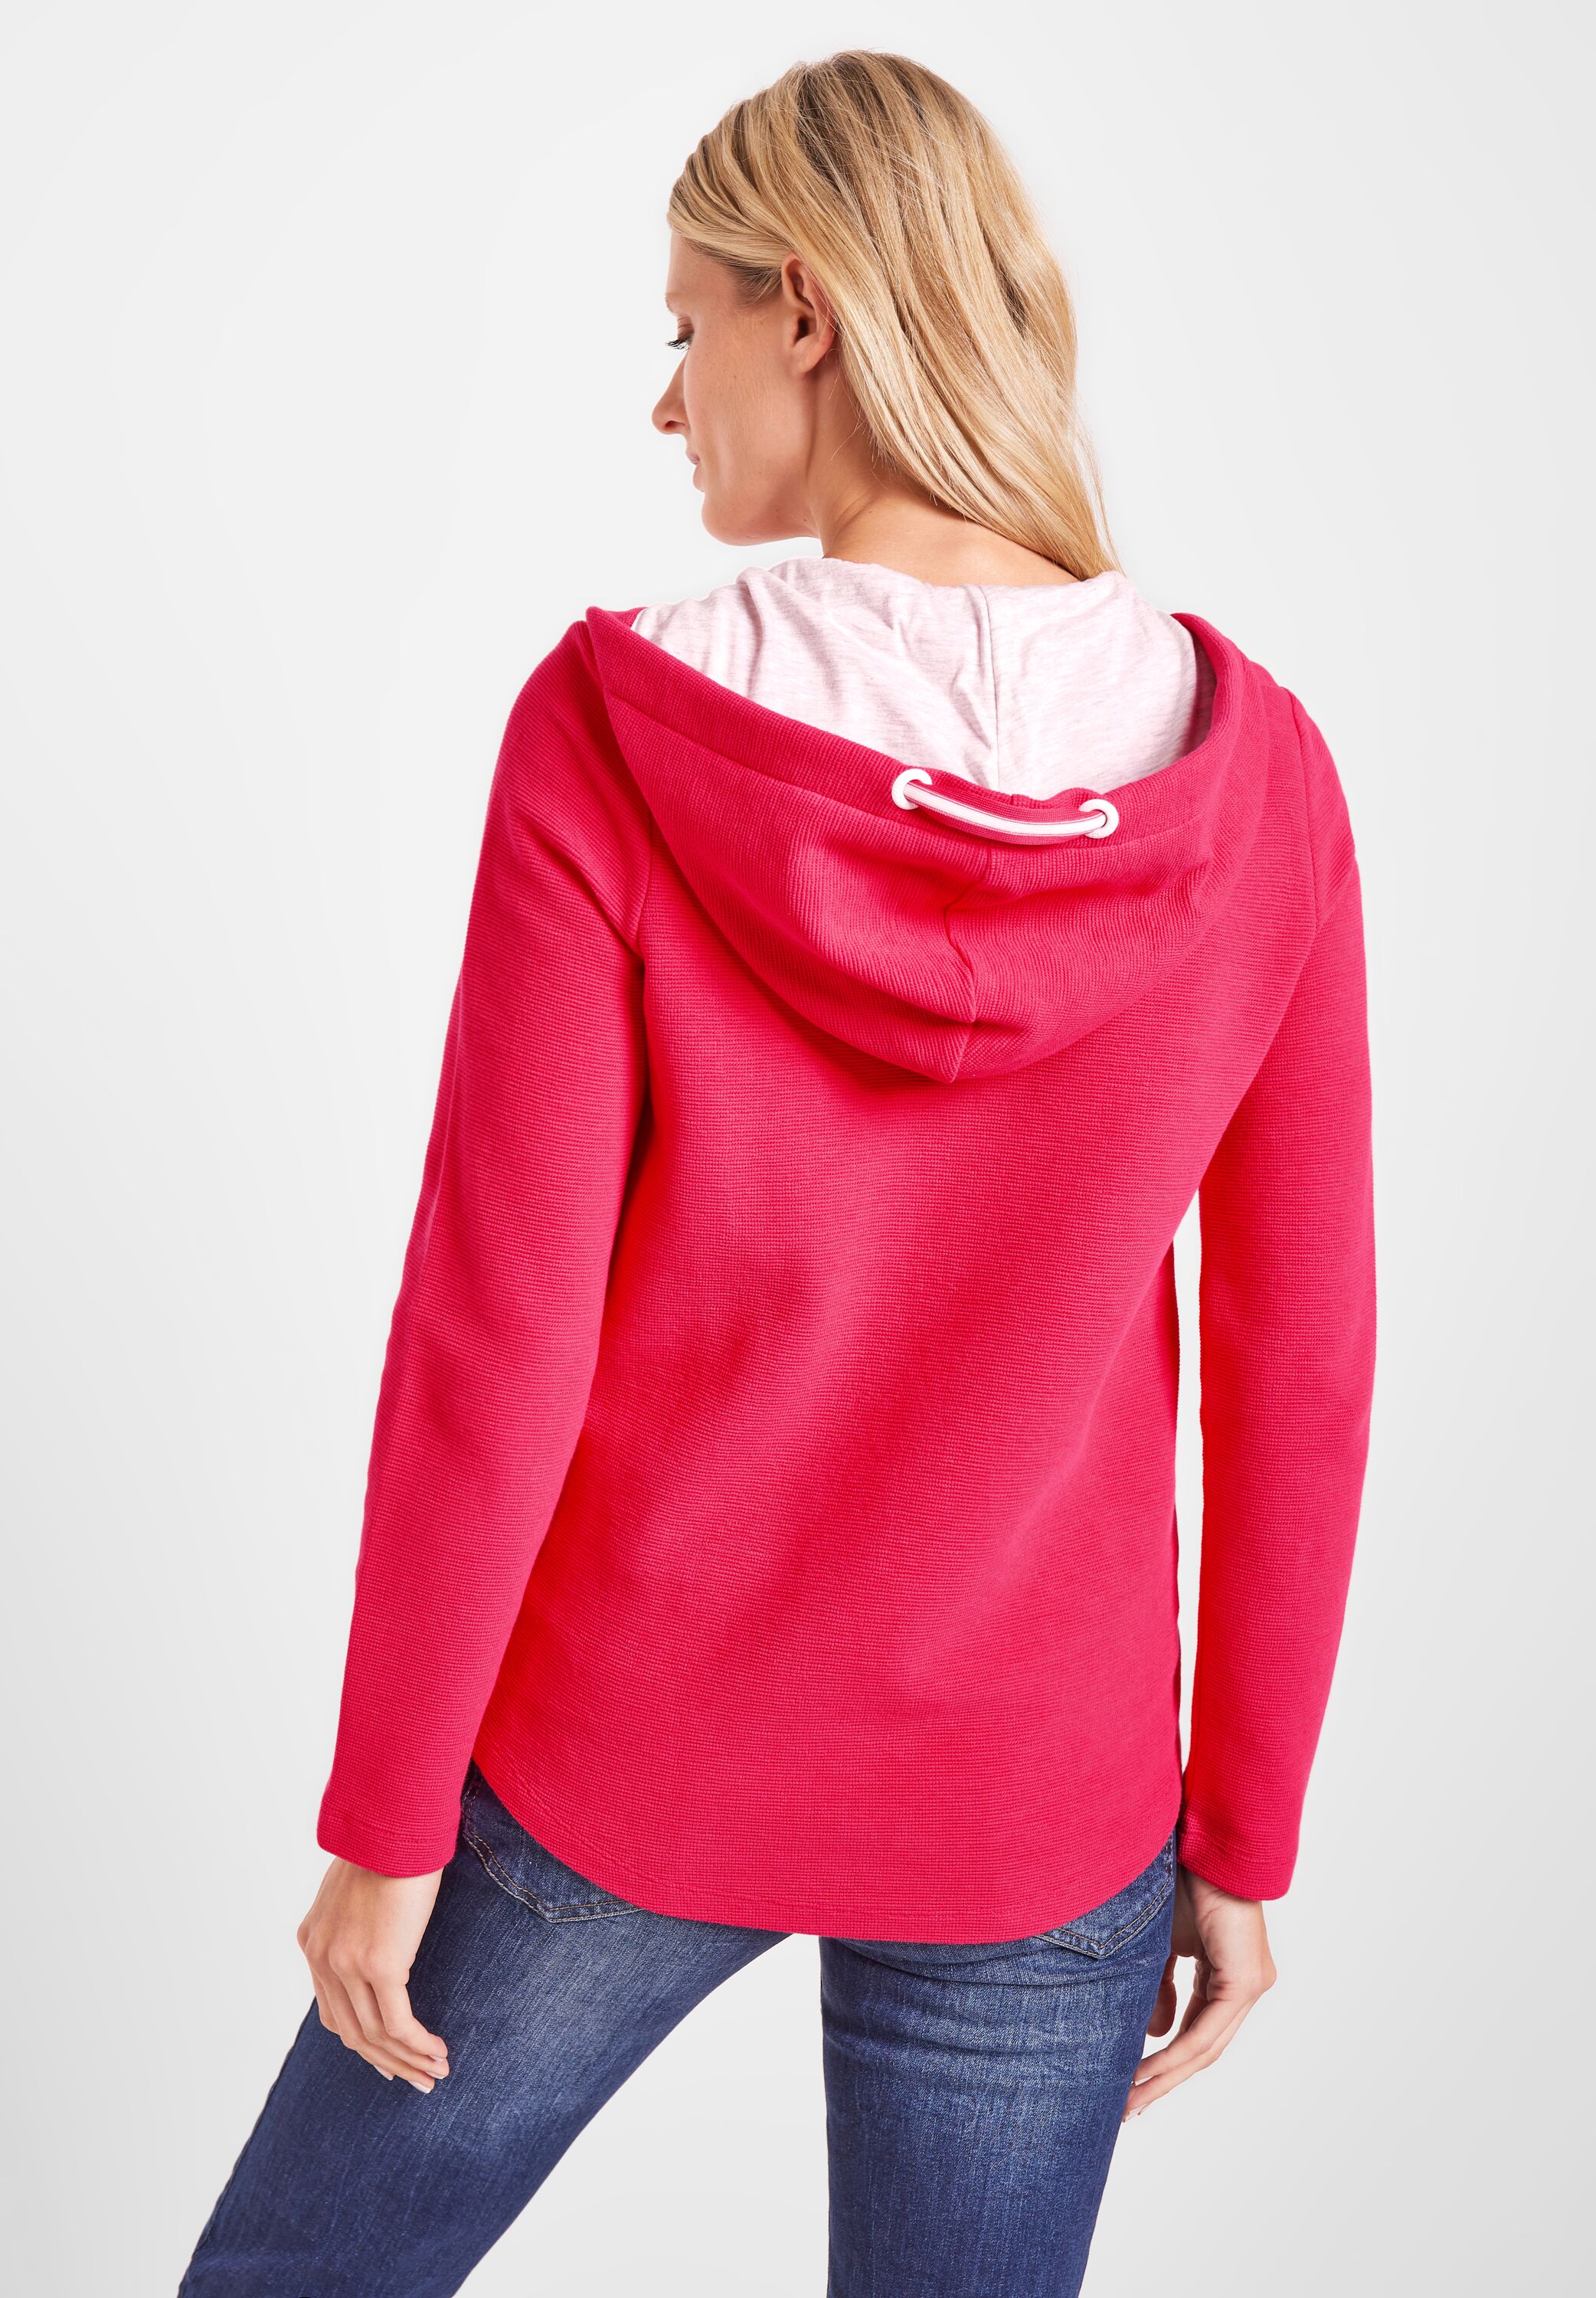 - im CONCEPT CECIL Red reduziert SALE Strawberry Shirtjacke B319398-14472 Mode in